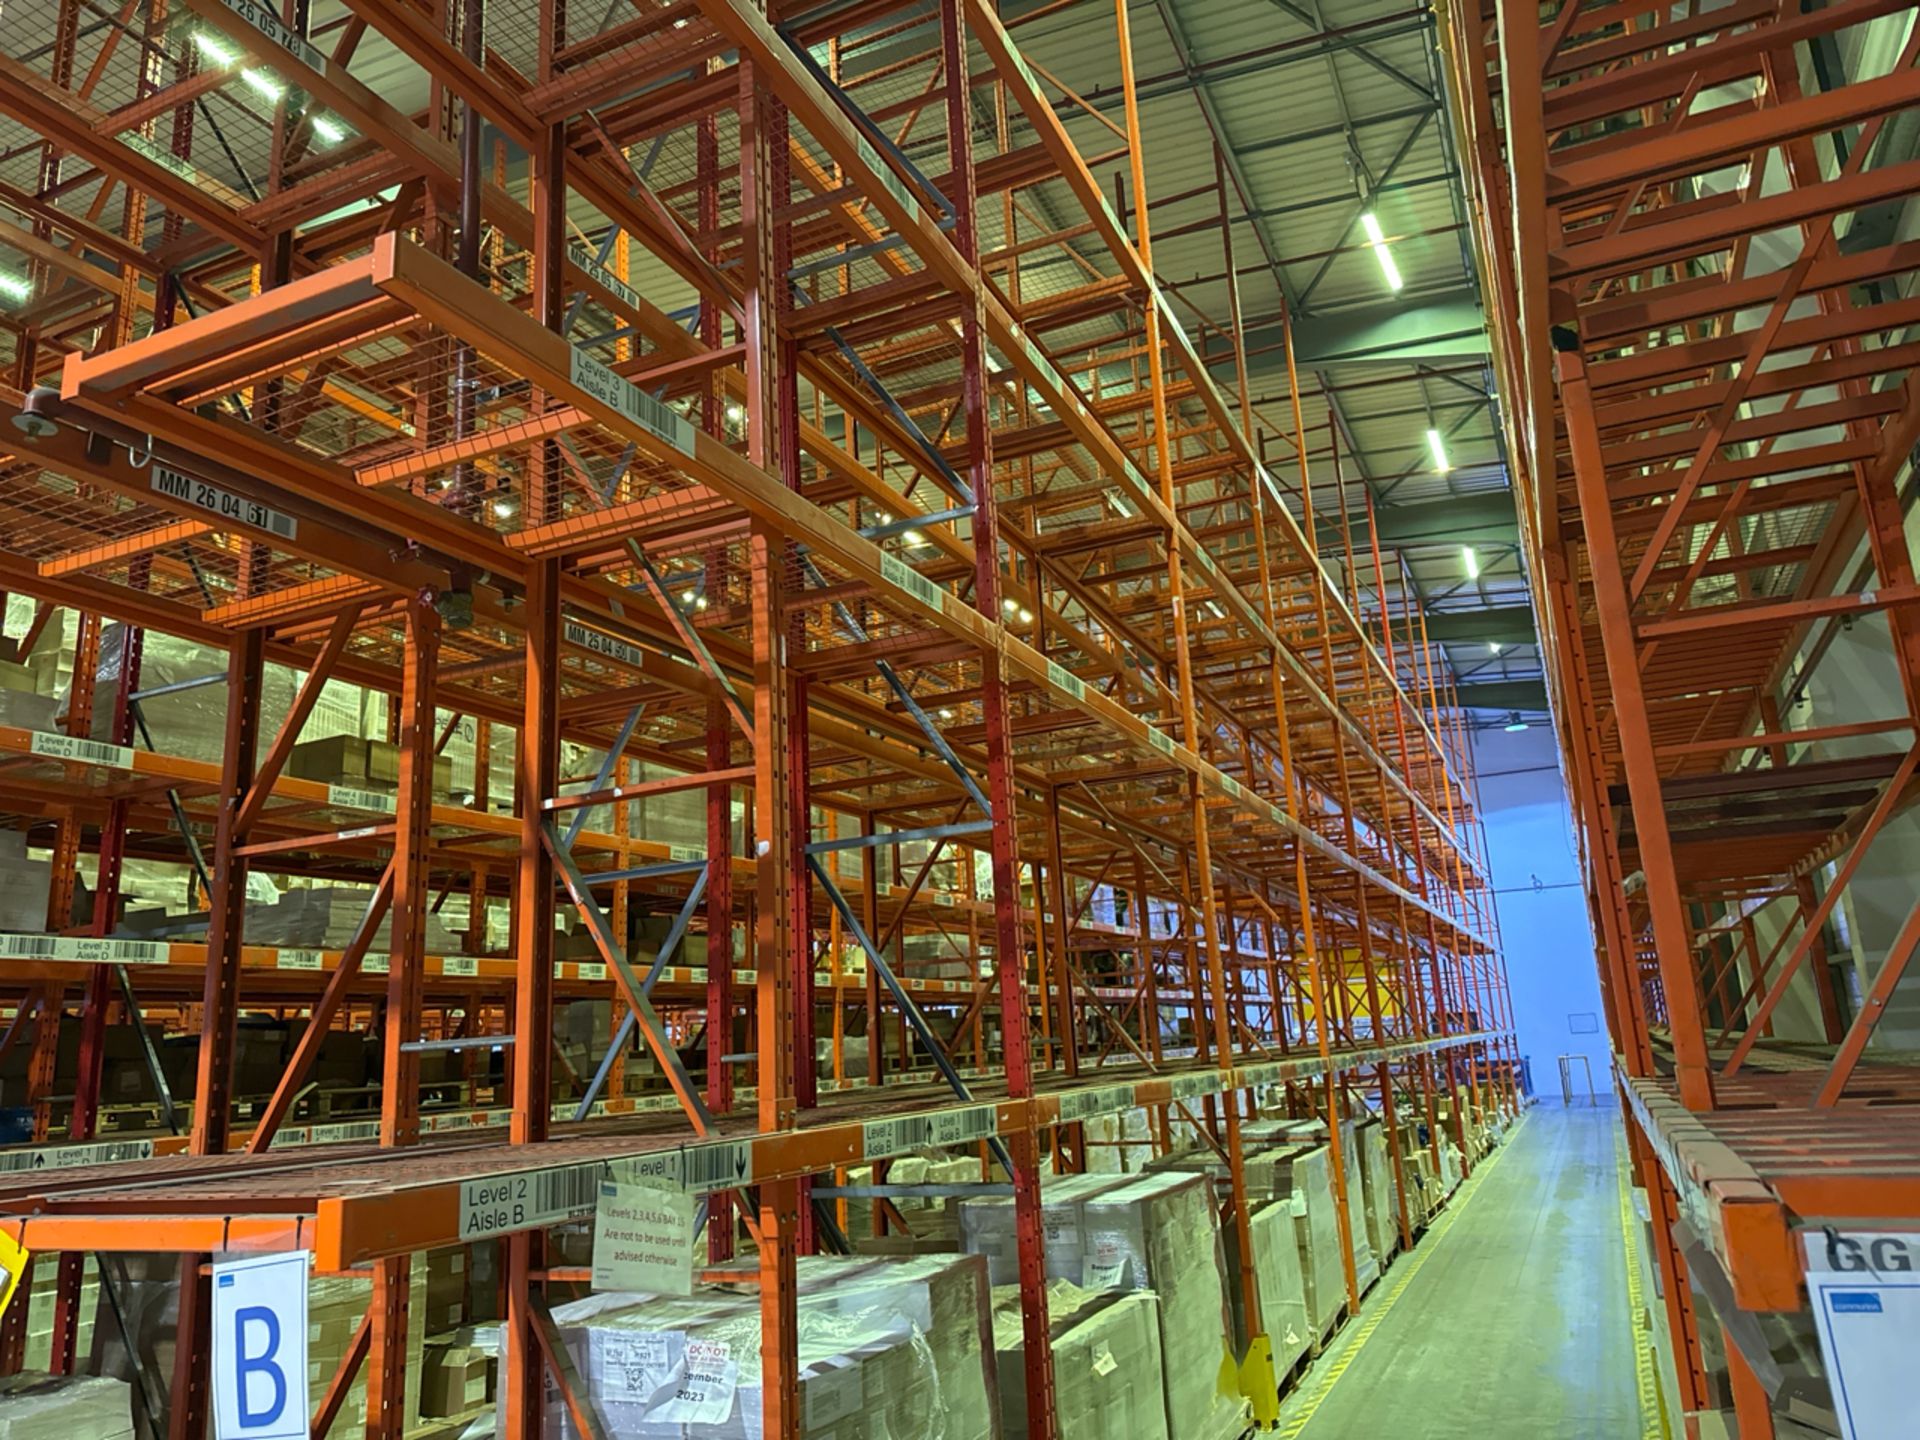 22 Bays Of Boltless Pallet Racking - Image 4 of 11